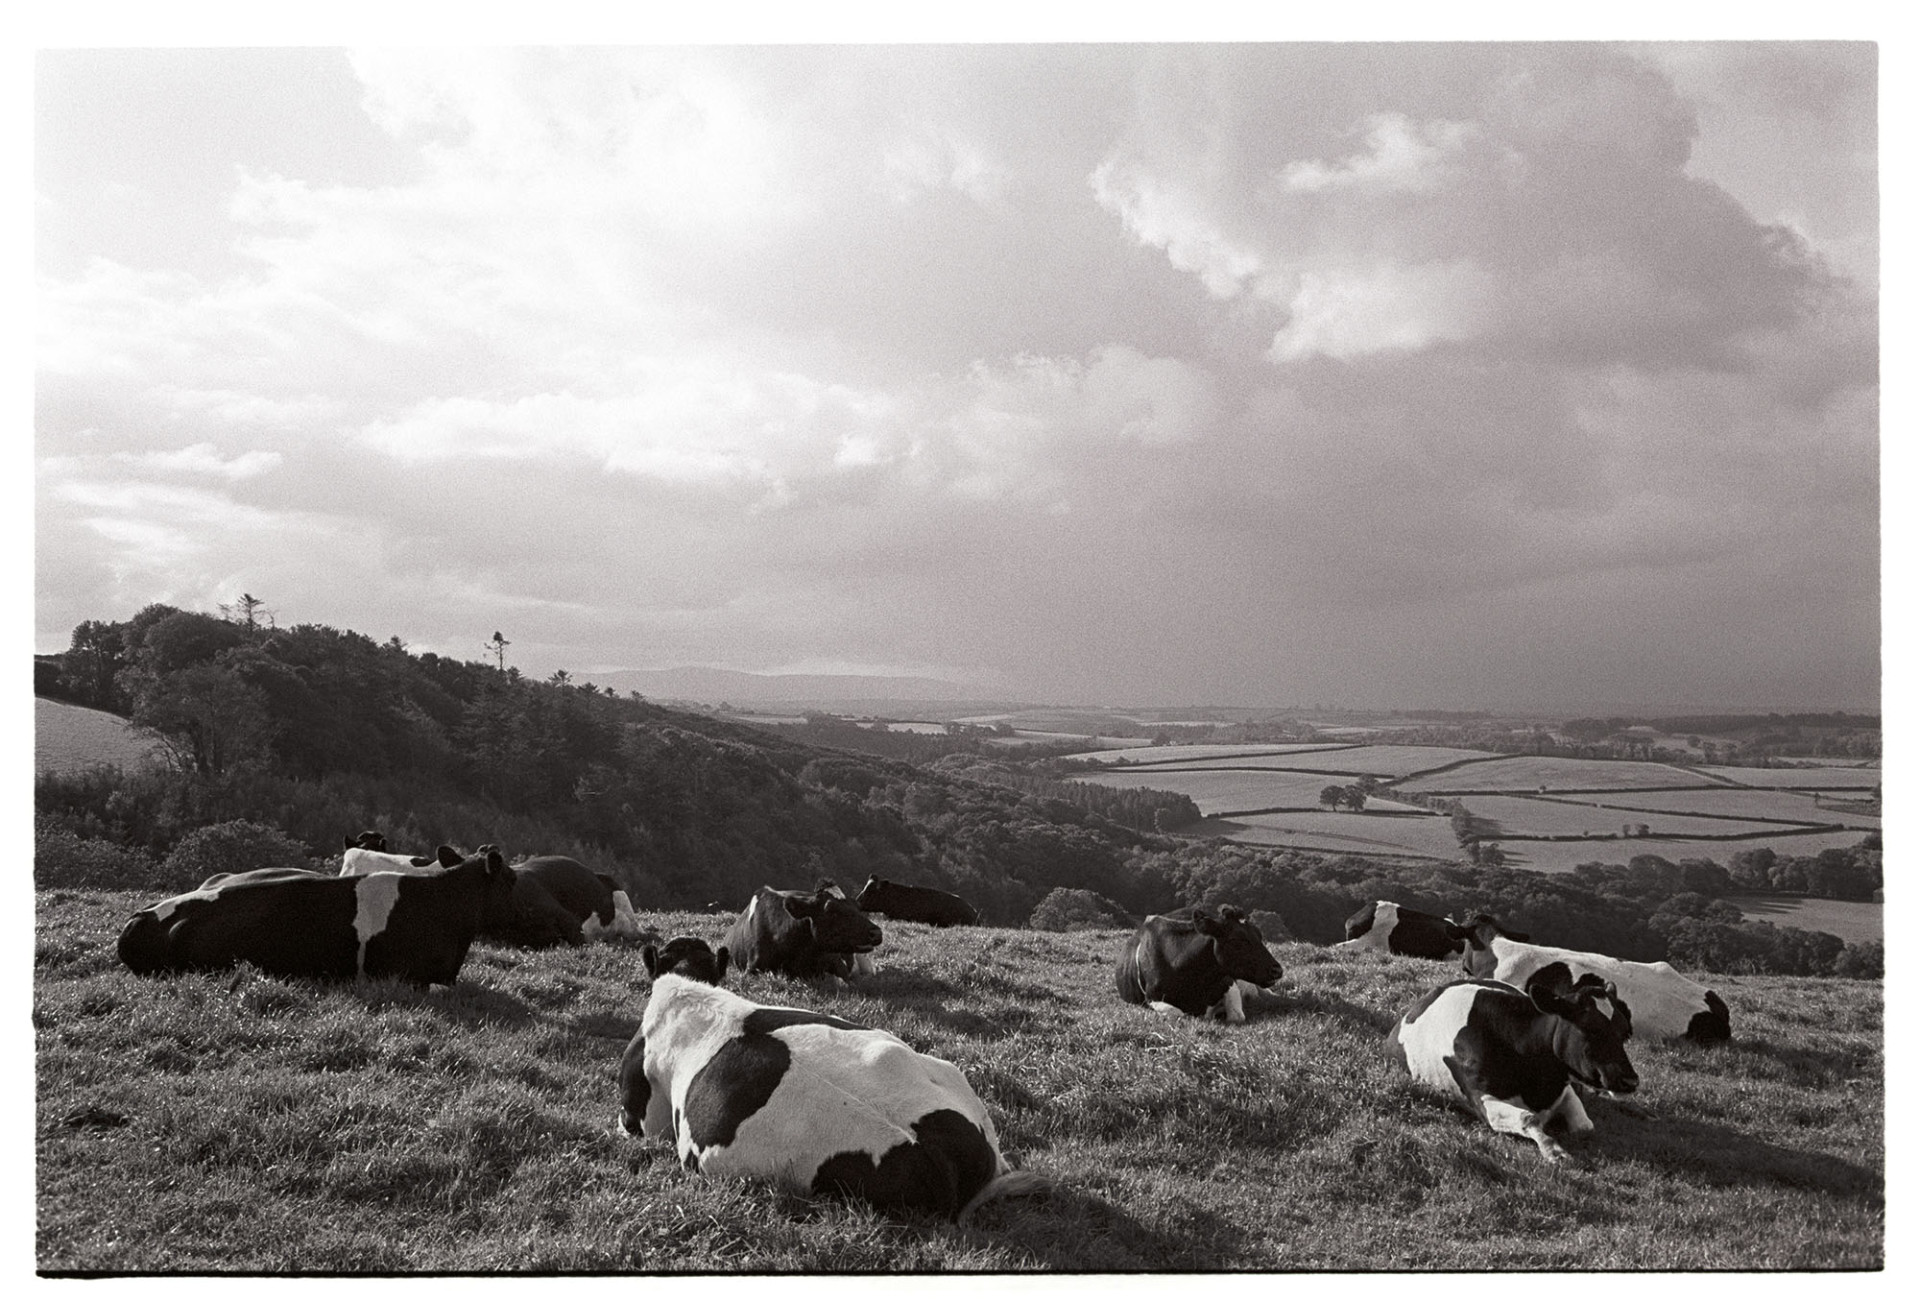 Cows with stormy sky, clouds. 
[Cows lying down in a field on a hill at Harepath, Beaford ,with a view of trees, fields and storm clouds in the distance.]